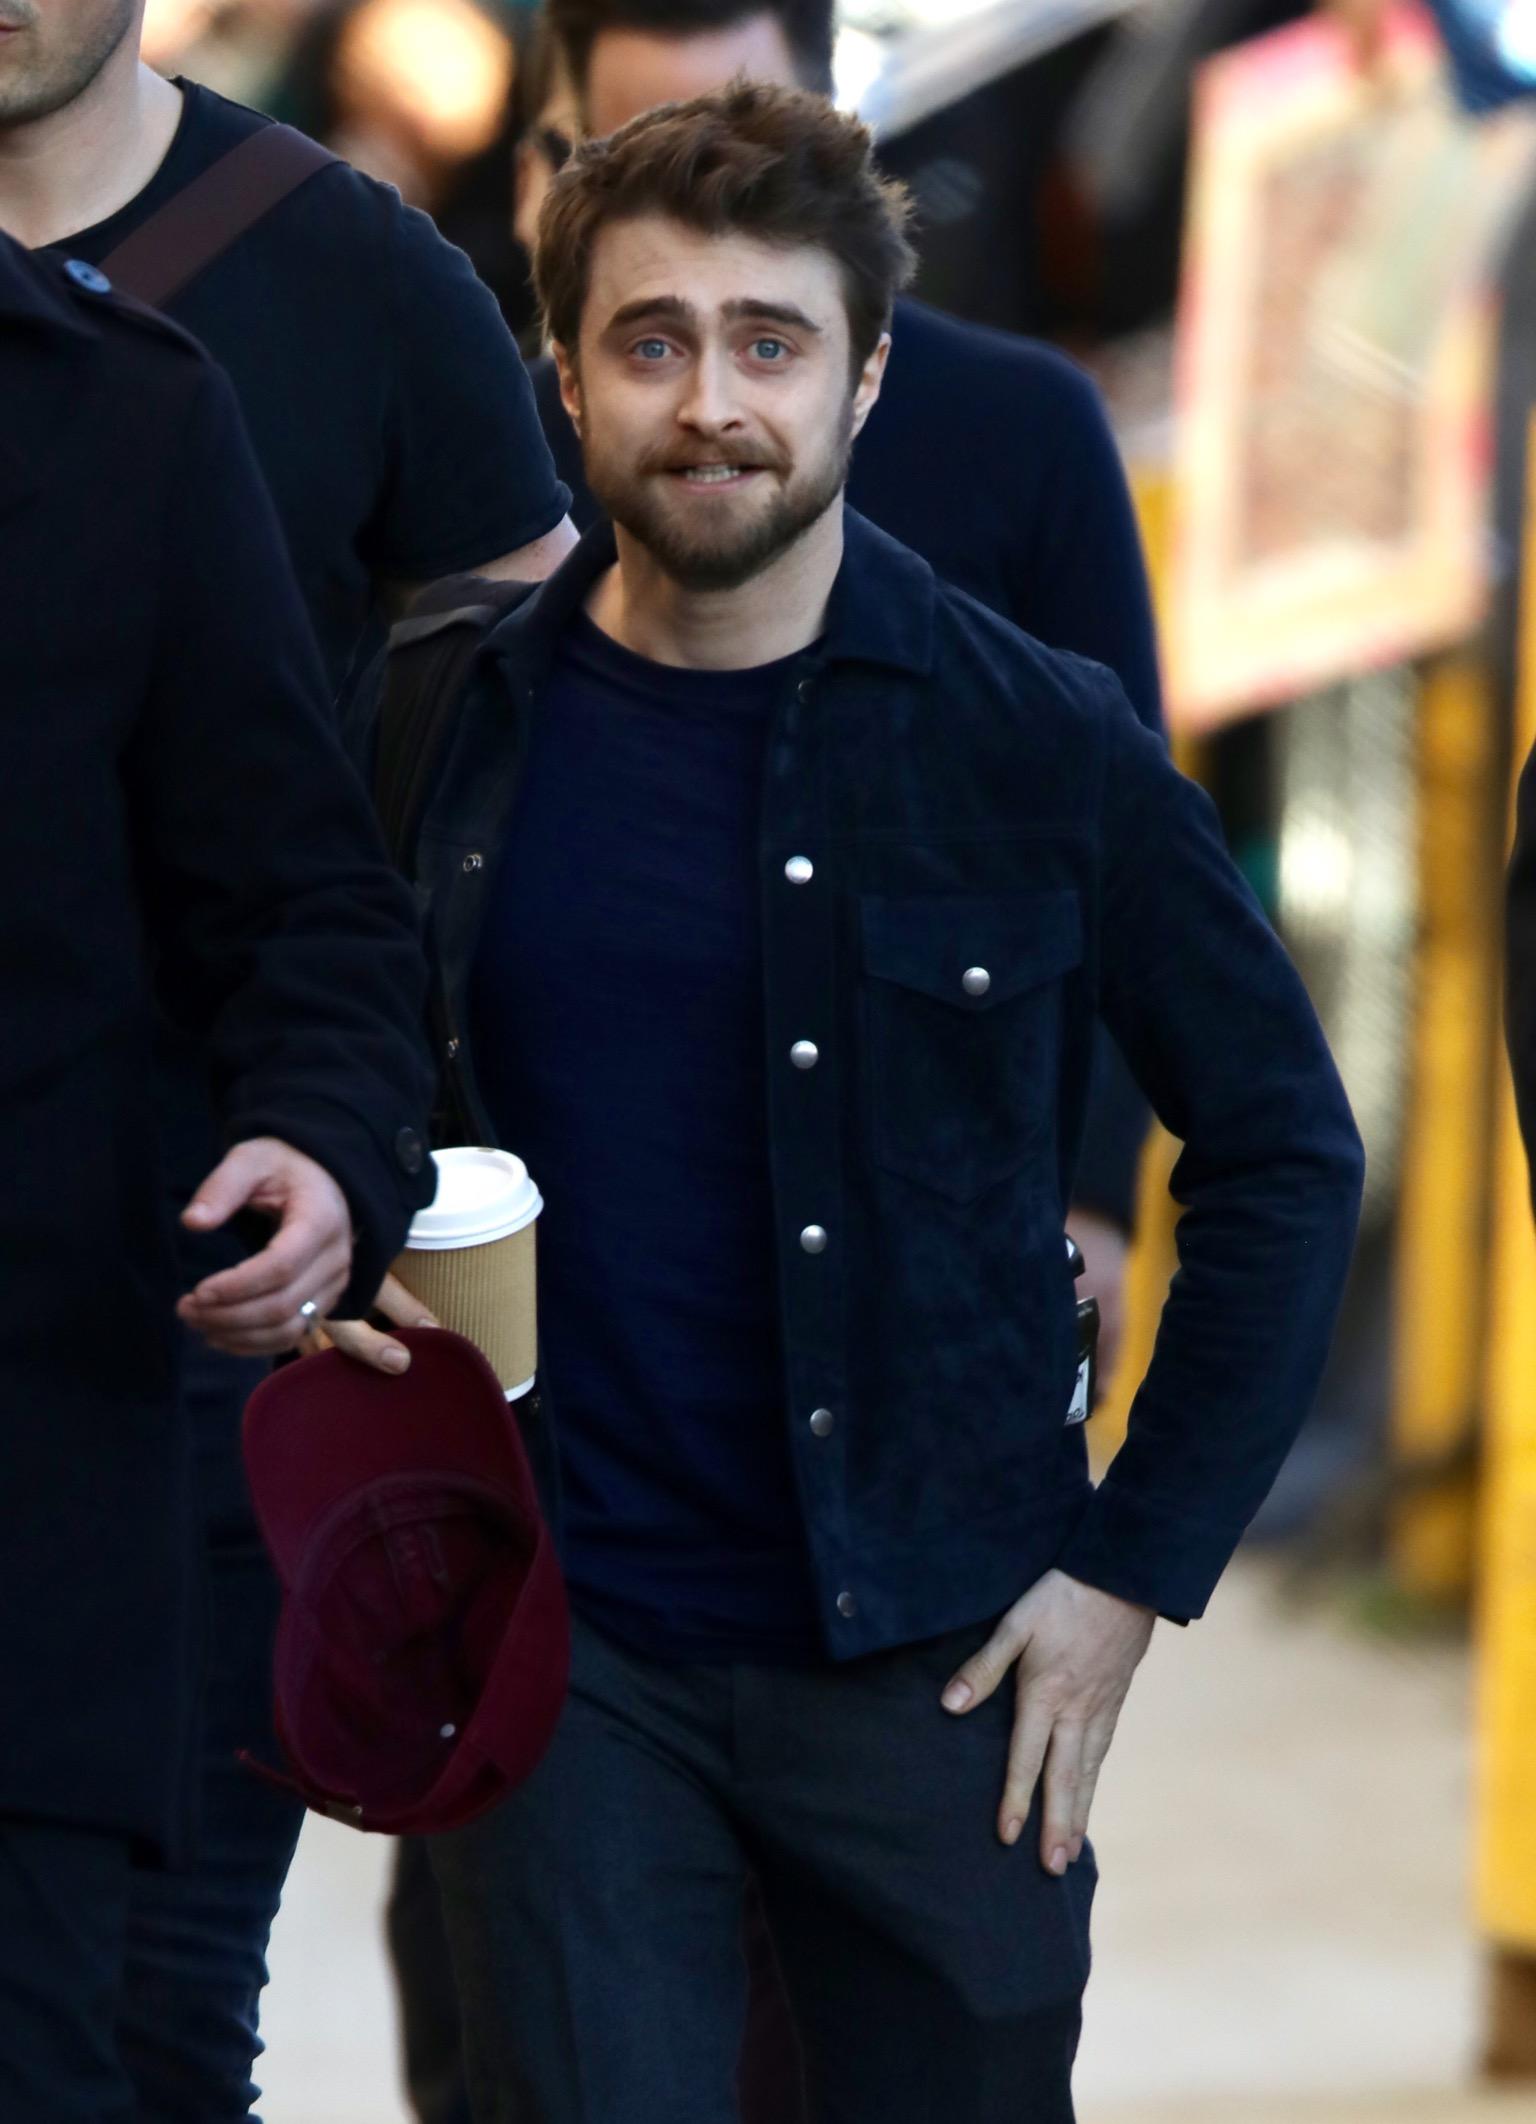 Daniel Radcliffe makes an appearance at Jimmy Kimmel